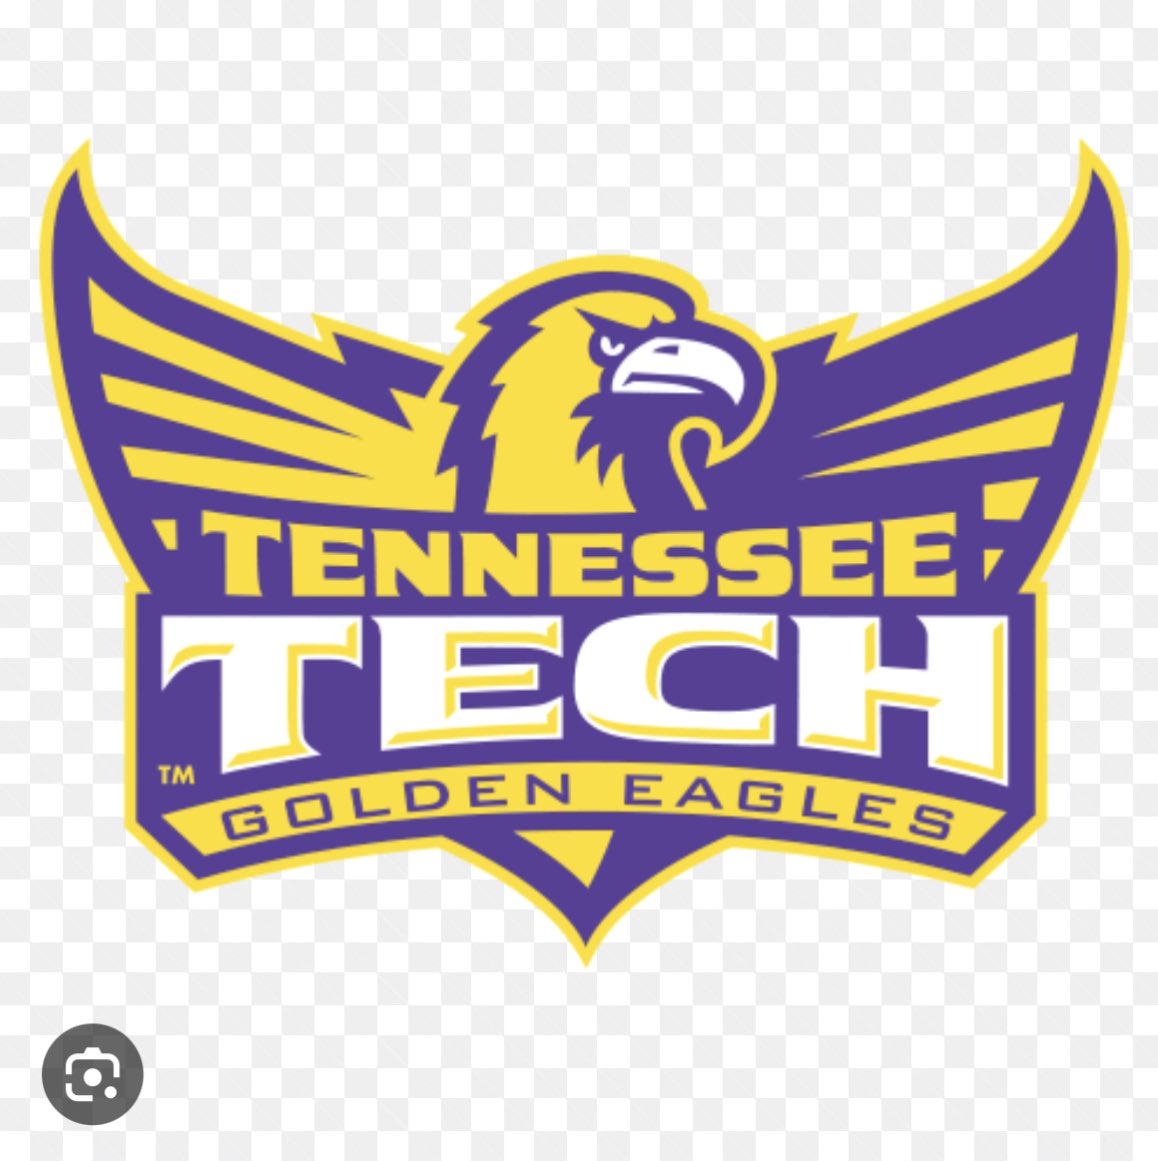 After a great conversation with @CoachWesSatt i am blessed and honored to receive my first division 1 football scholarship from Tennessee Tech university @FRHS_Football @Aaquil_Annoor @Radir_Annoor @TNSavages7v7 @Canon_Jackson7